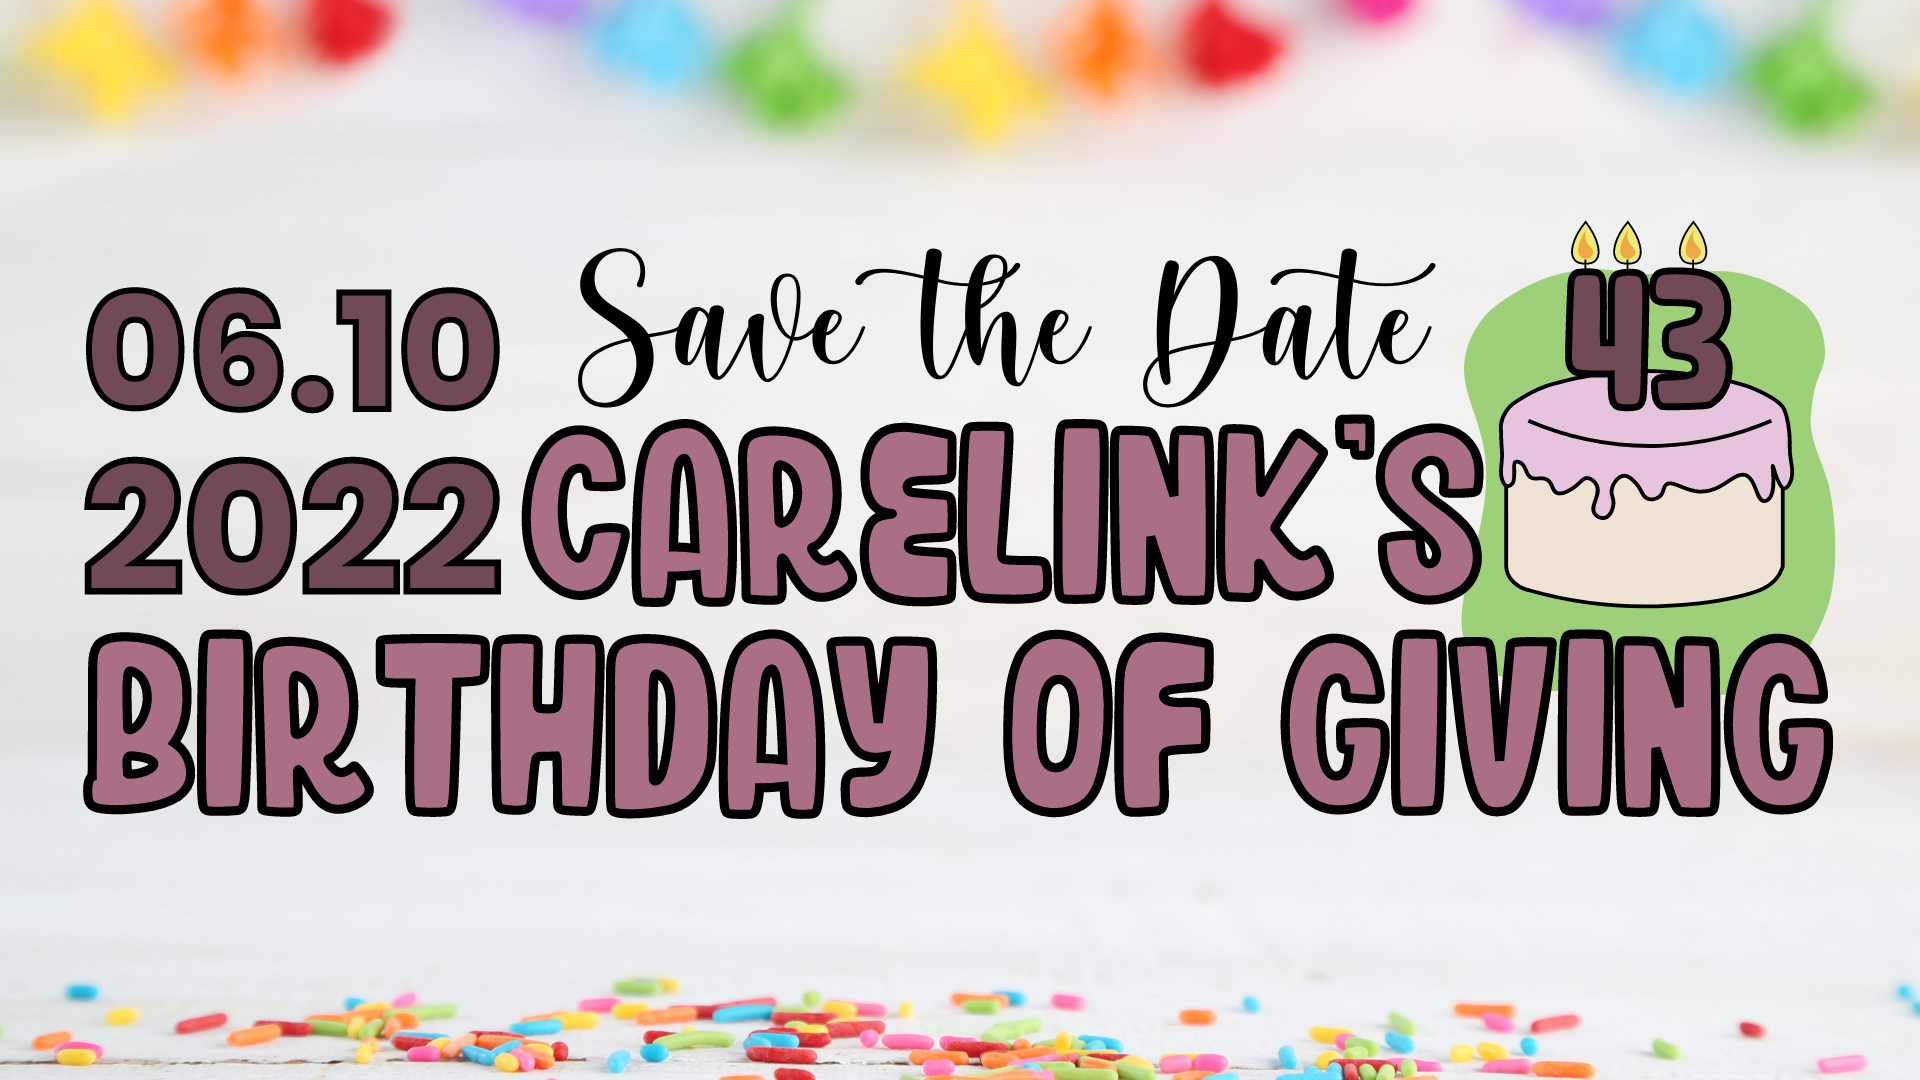 6/10/2022 Save the Date, Carelink's Birthday of Giving